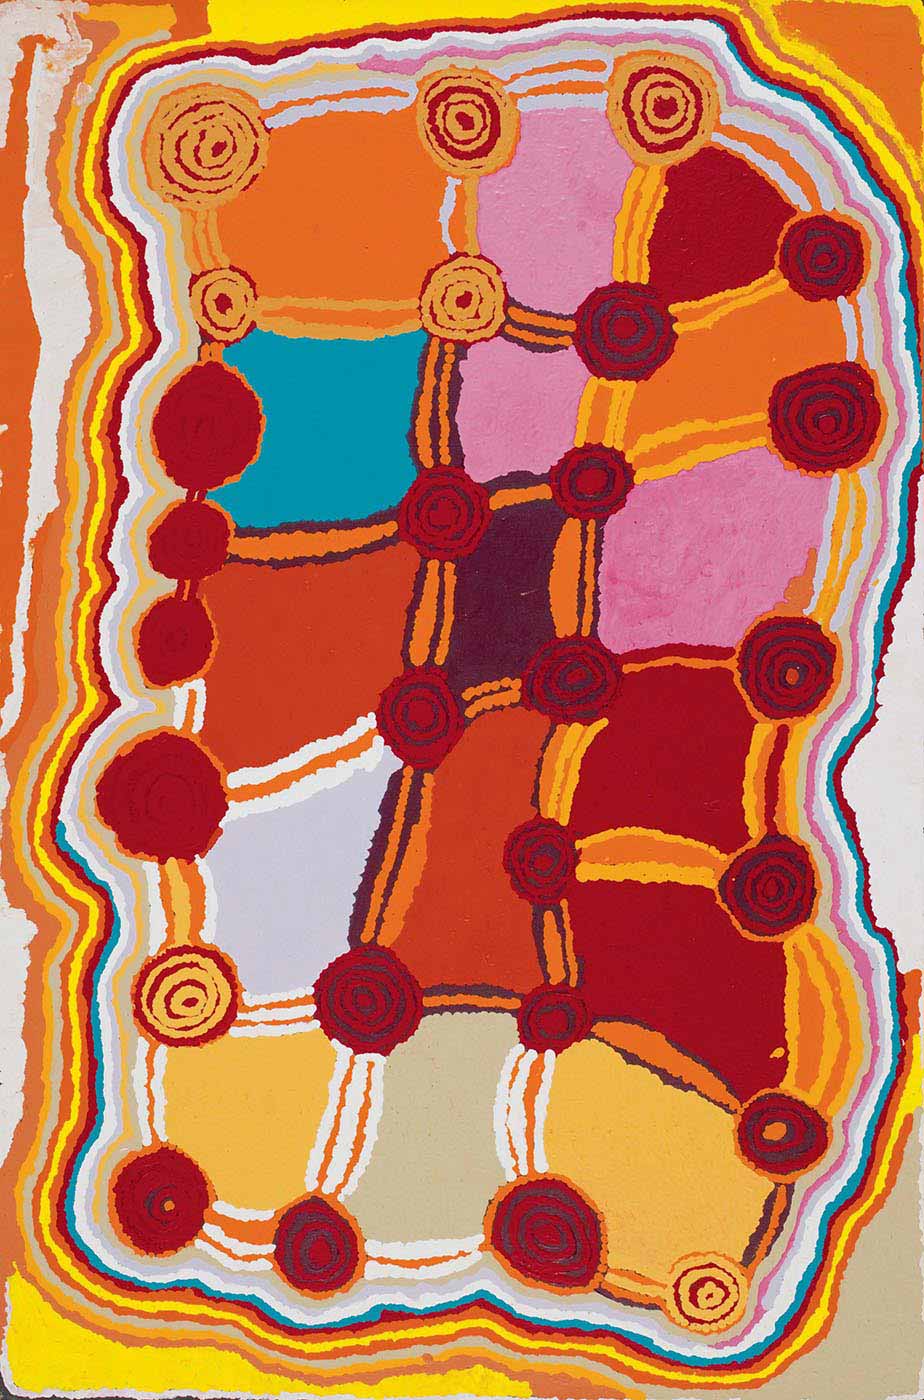 A painting on brown linen with one blue square of solid paint in the upper left corner. There is a grid of red concentric circles, some with beige, black or yellow rings, connected by orange, yellow, white, black or beige striped lines, and with textured solid colours filling the spaces between. The square-like spaces are orange, pink, red, blue, black, brown, lavender, cream and pale green. Around the edge is a border in aqua, red, orange, yellow and beige with the top right and bottom left corners filled with solid colour. - click to view larger image